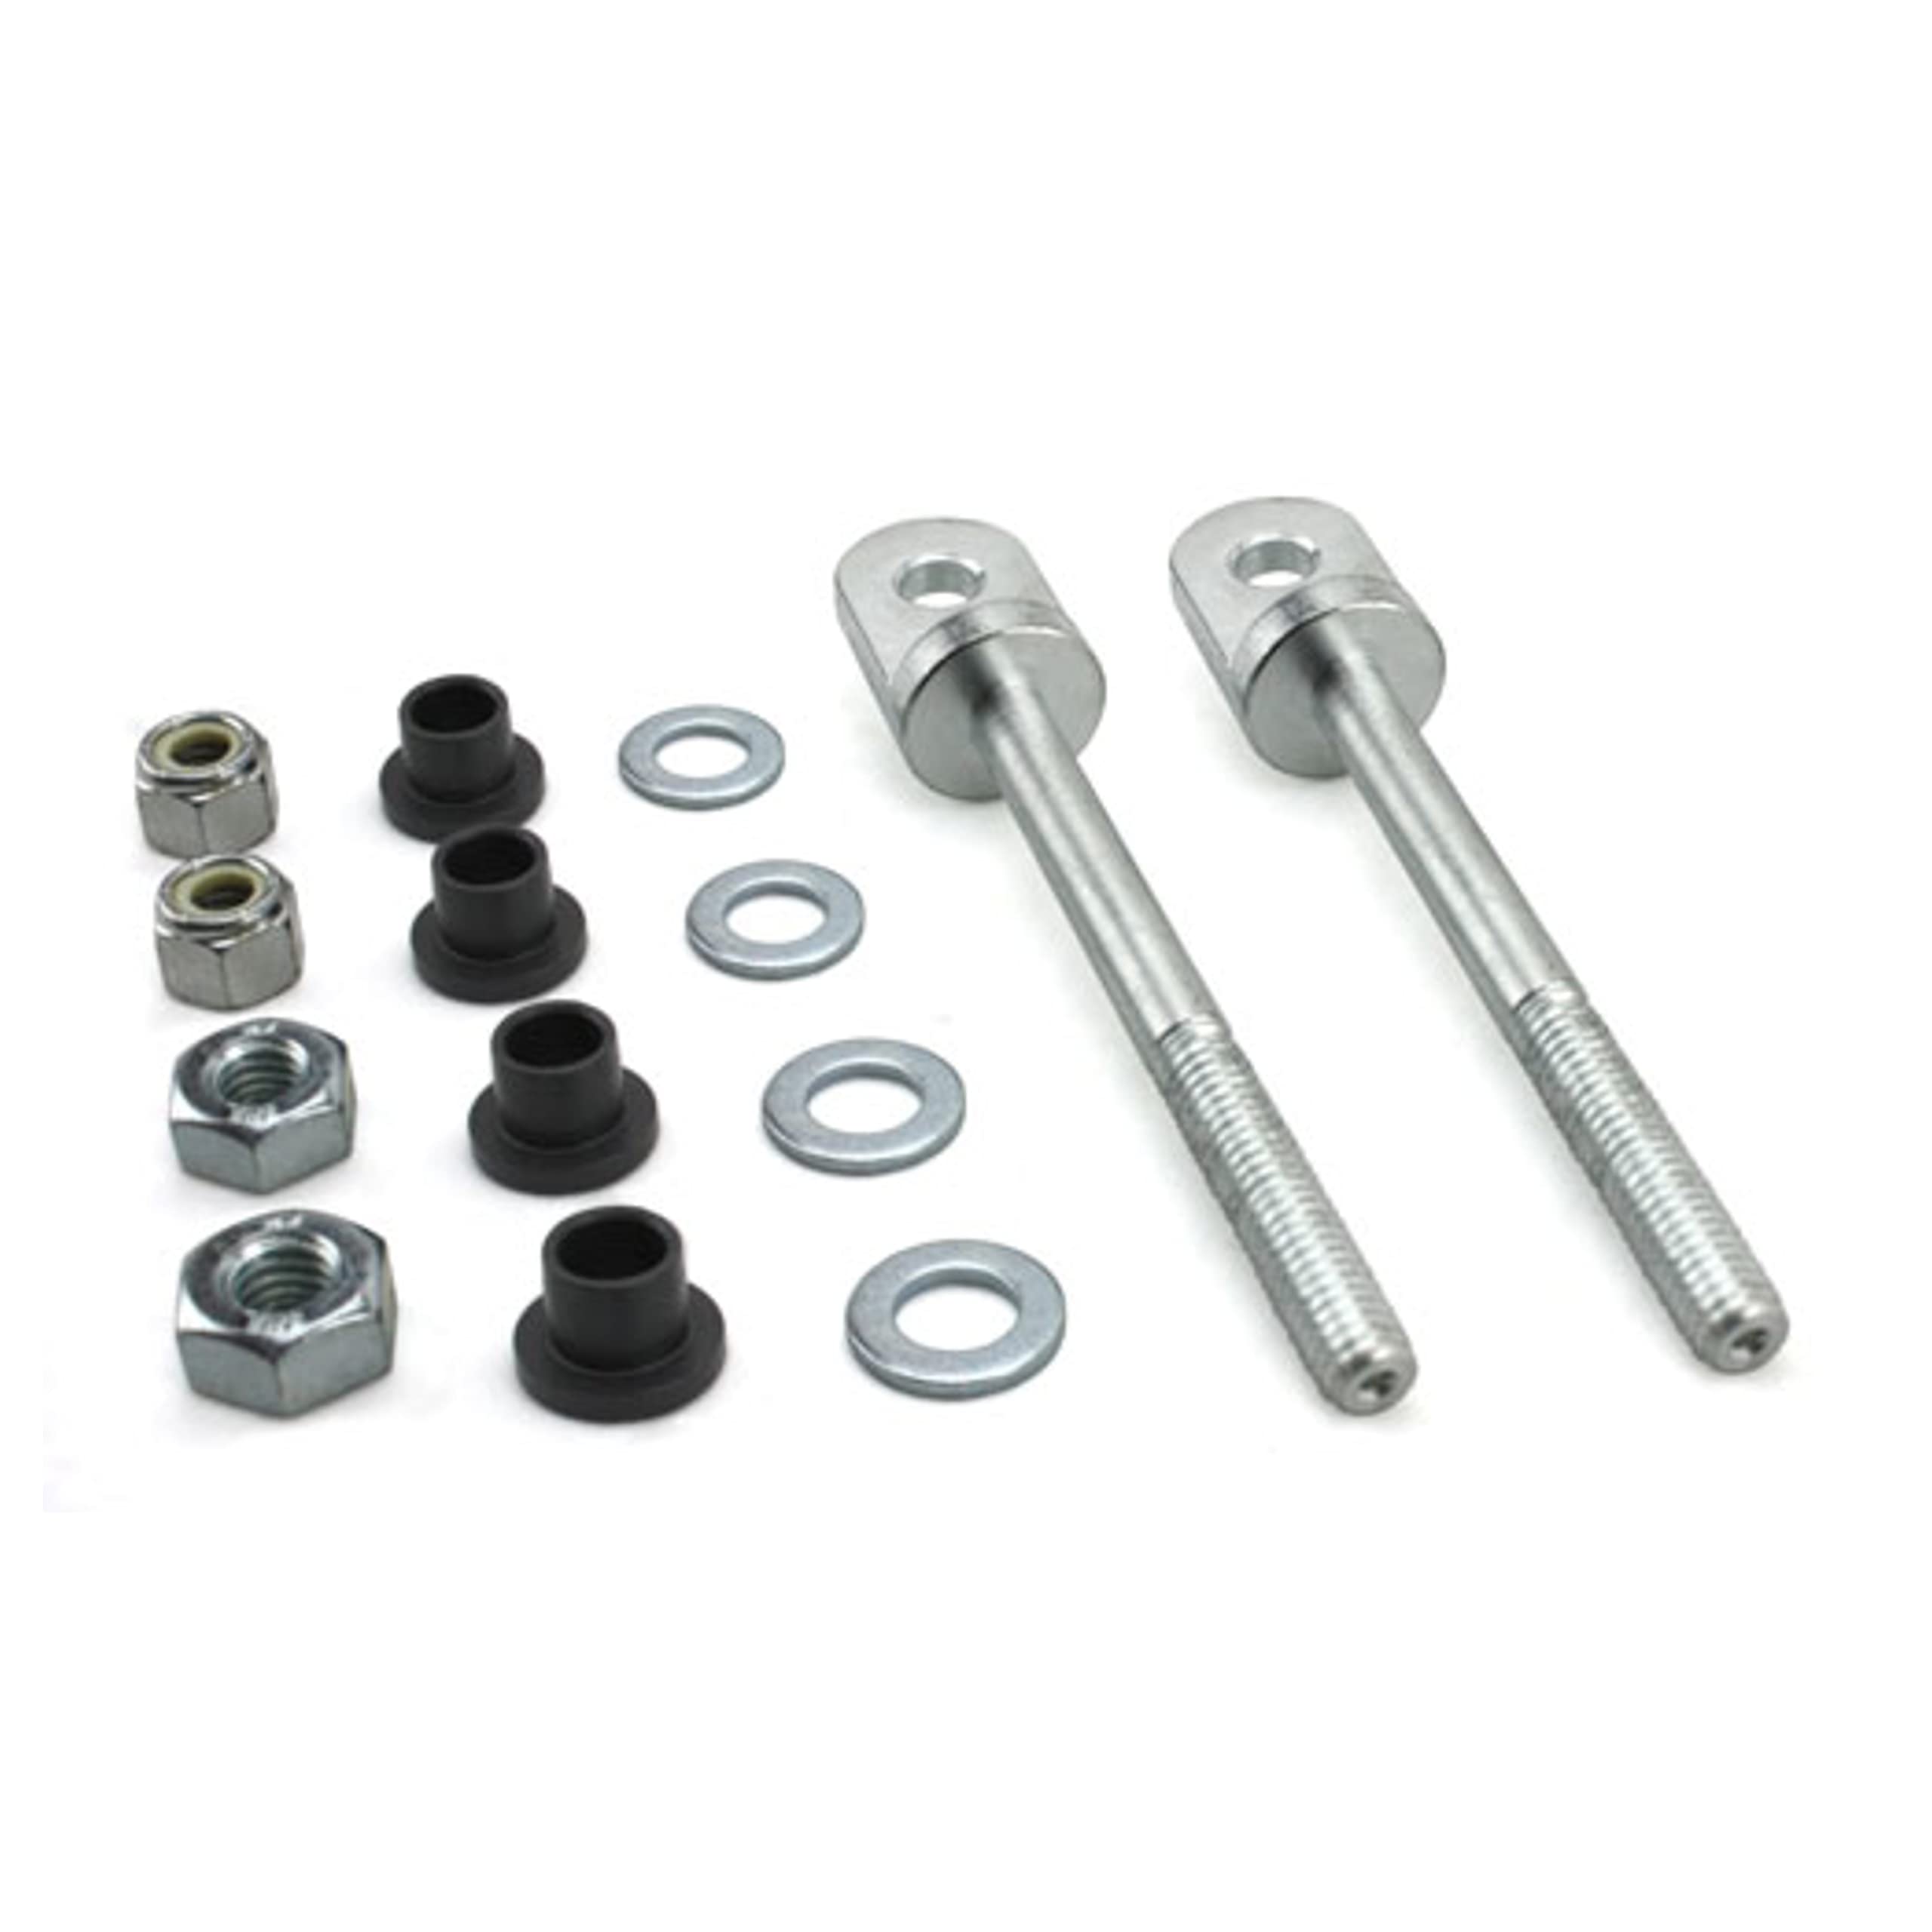 JACK LEG 4IN SWING BOLT KIT REPLACEMENT PARTS FOR JT STRONGARM